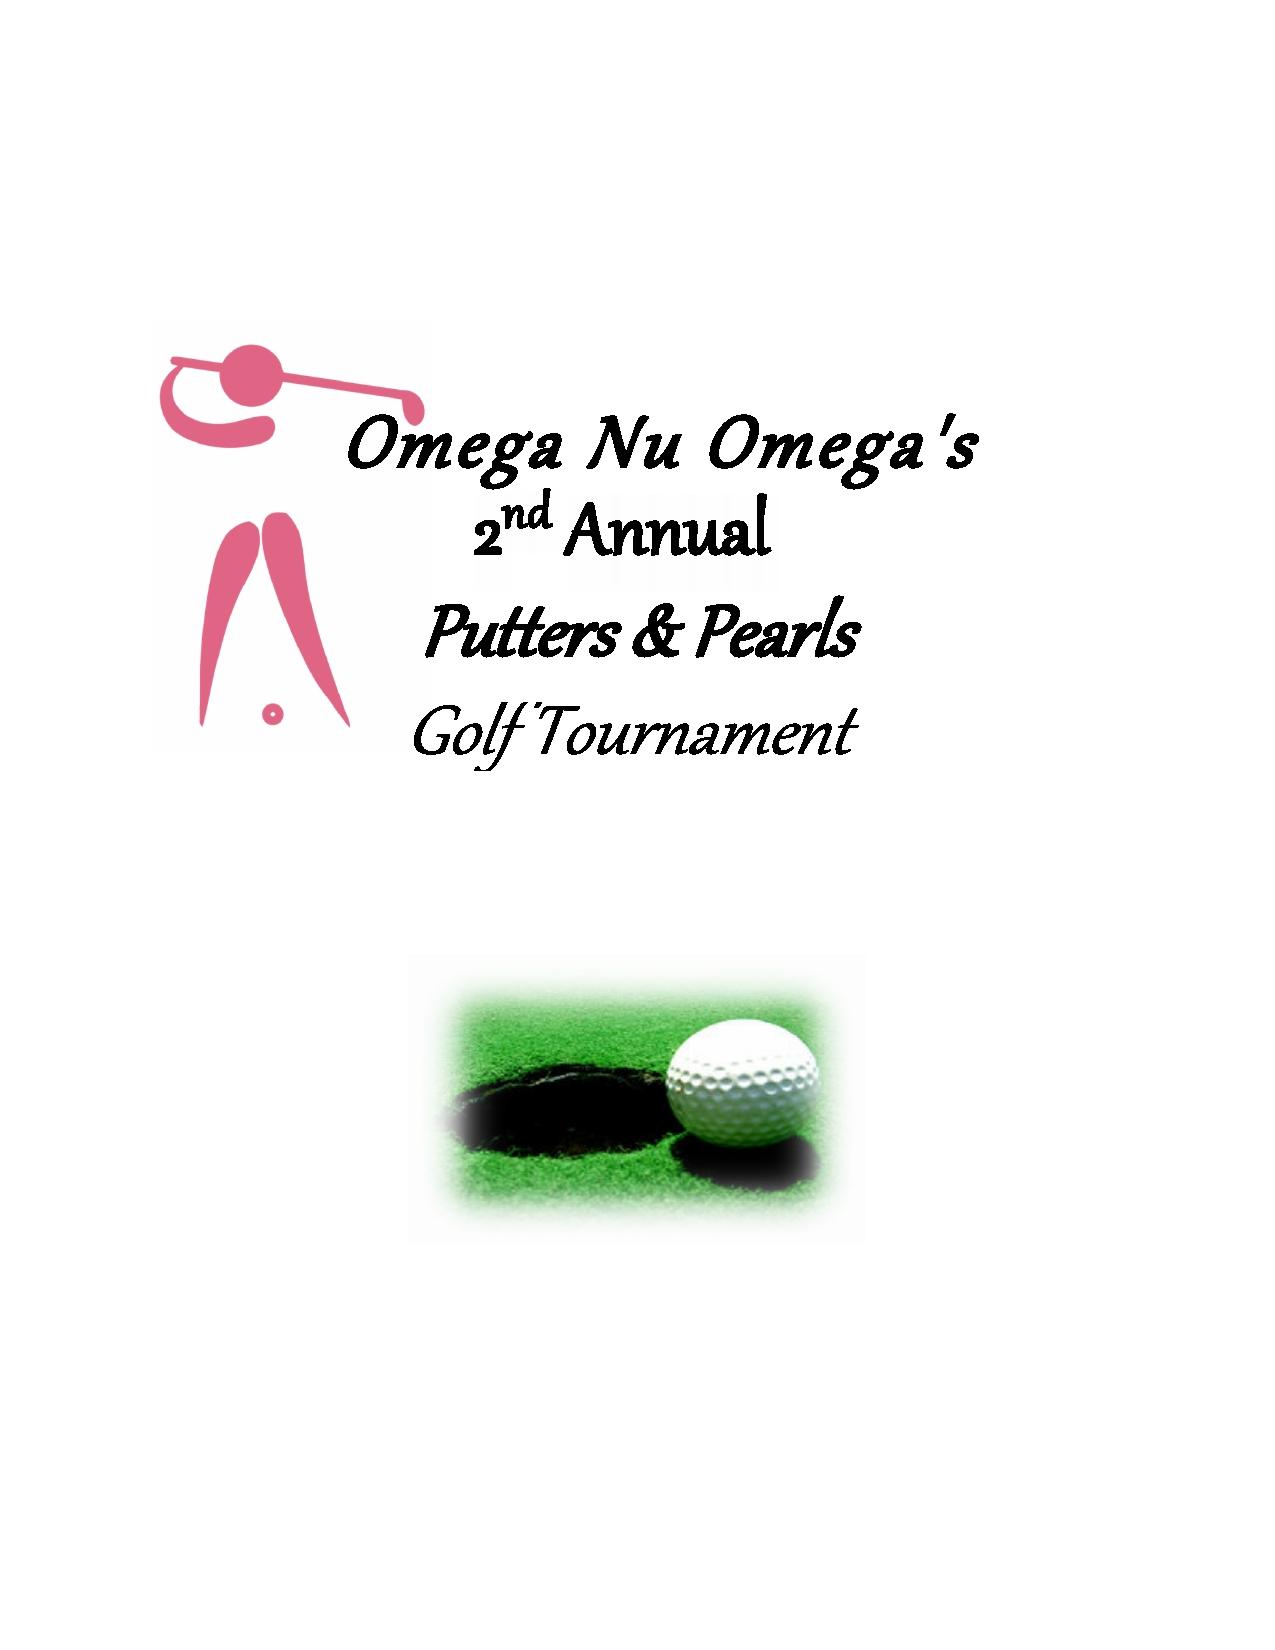 Omega Nu Omega's 2nd Annual Putters and Pearls Golf Tournament